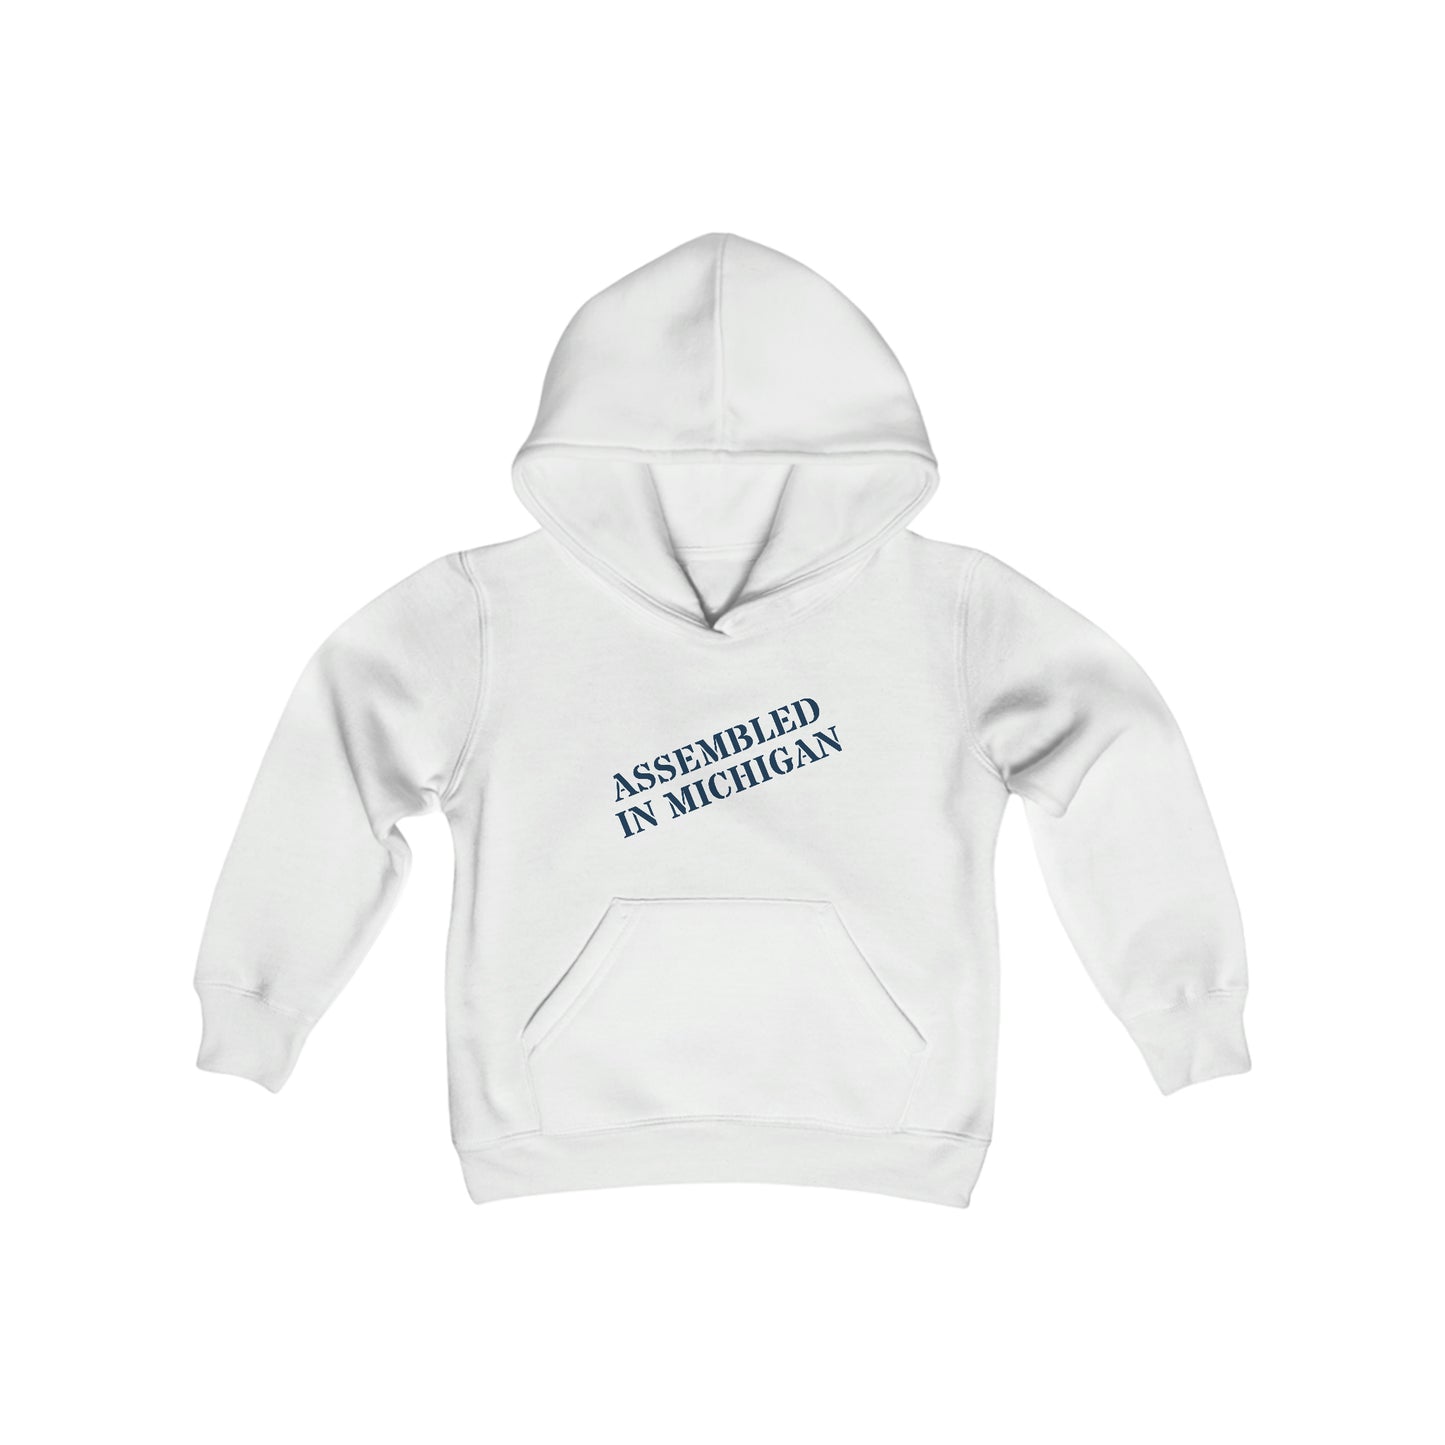 'Assembled in Michigan' Hoodie | Unisex Youth